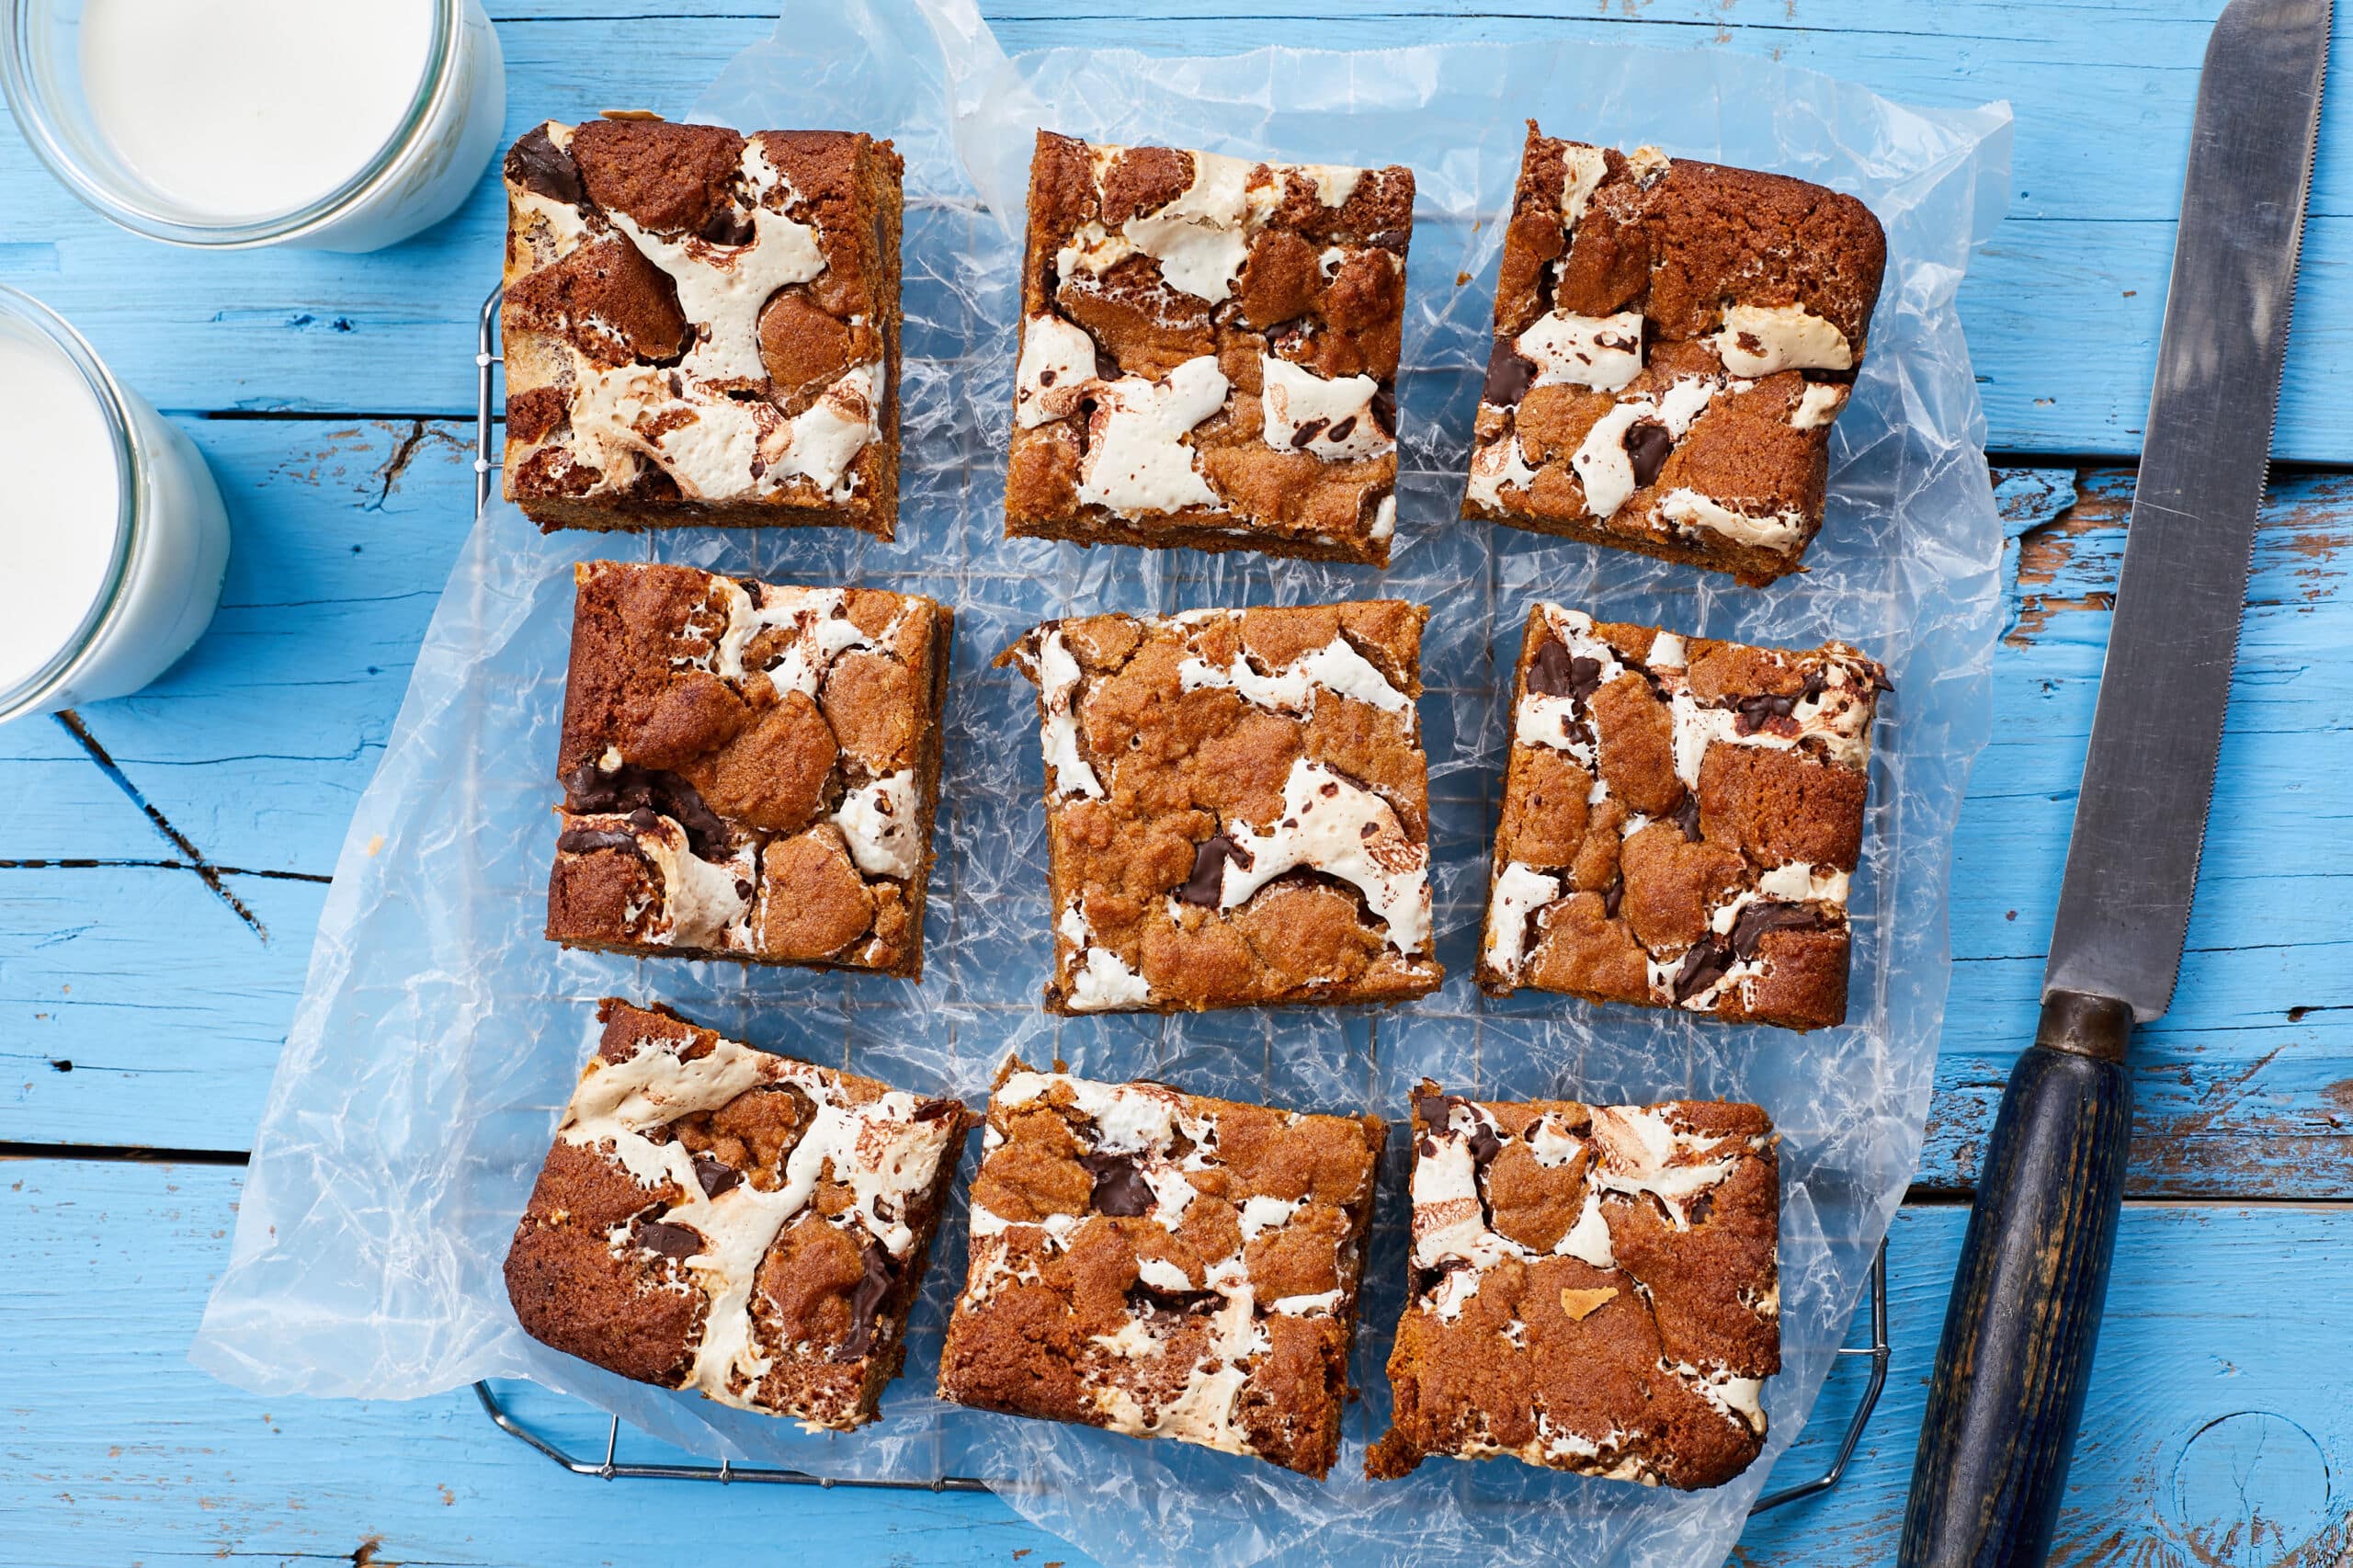 An over-head shot at nine generous squares of Smores bars shows the crinkle top, goes chocolate and marshmallow fluff.